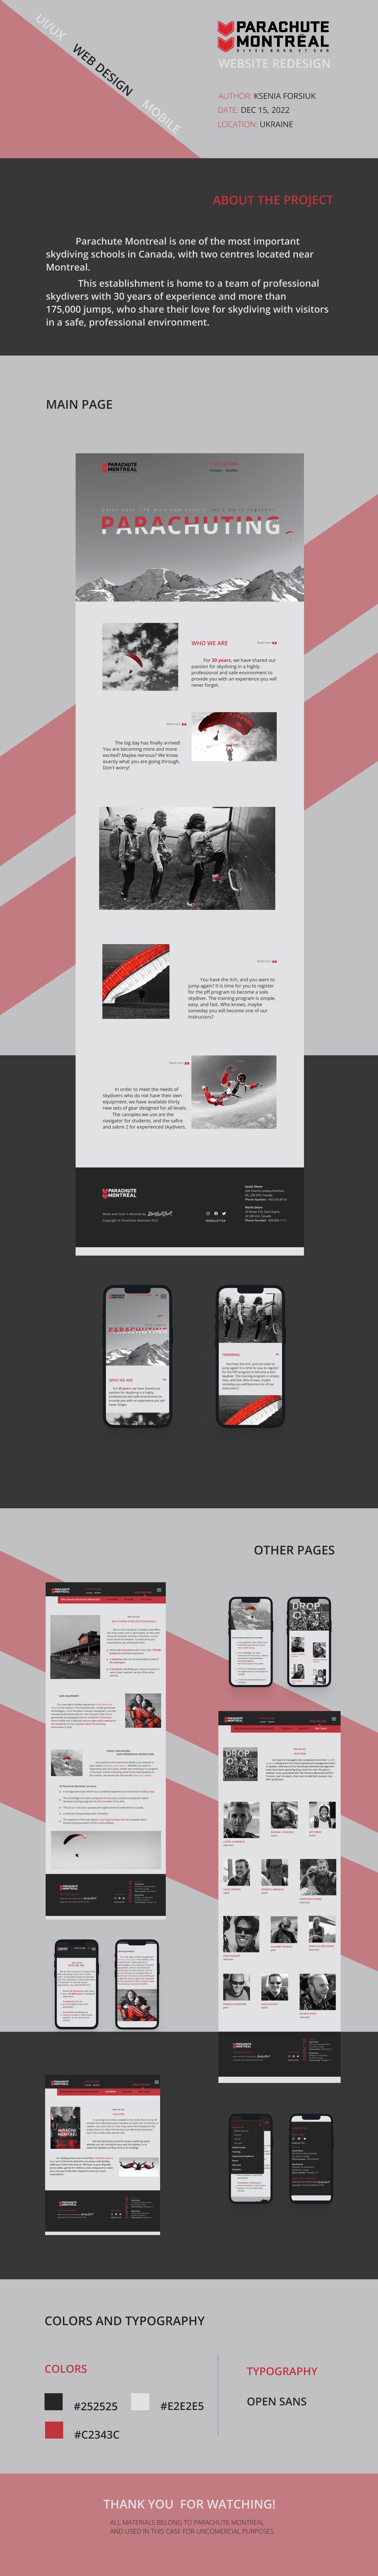 #redesign  #webdesign firstproject Parachute Skydiving ux/ui Web